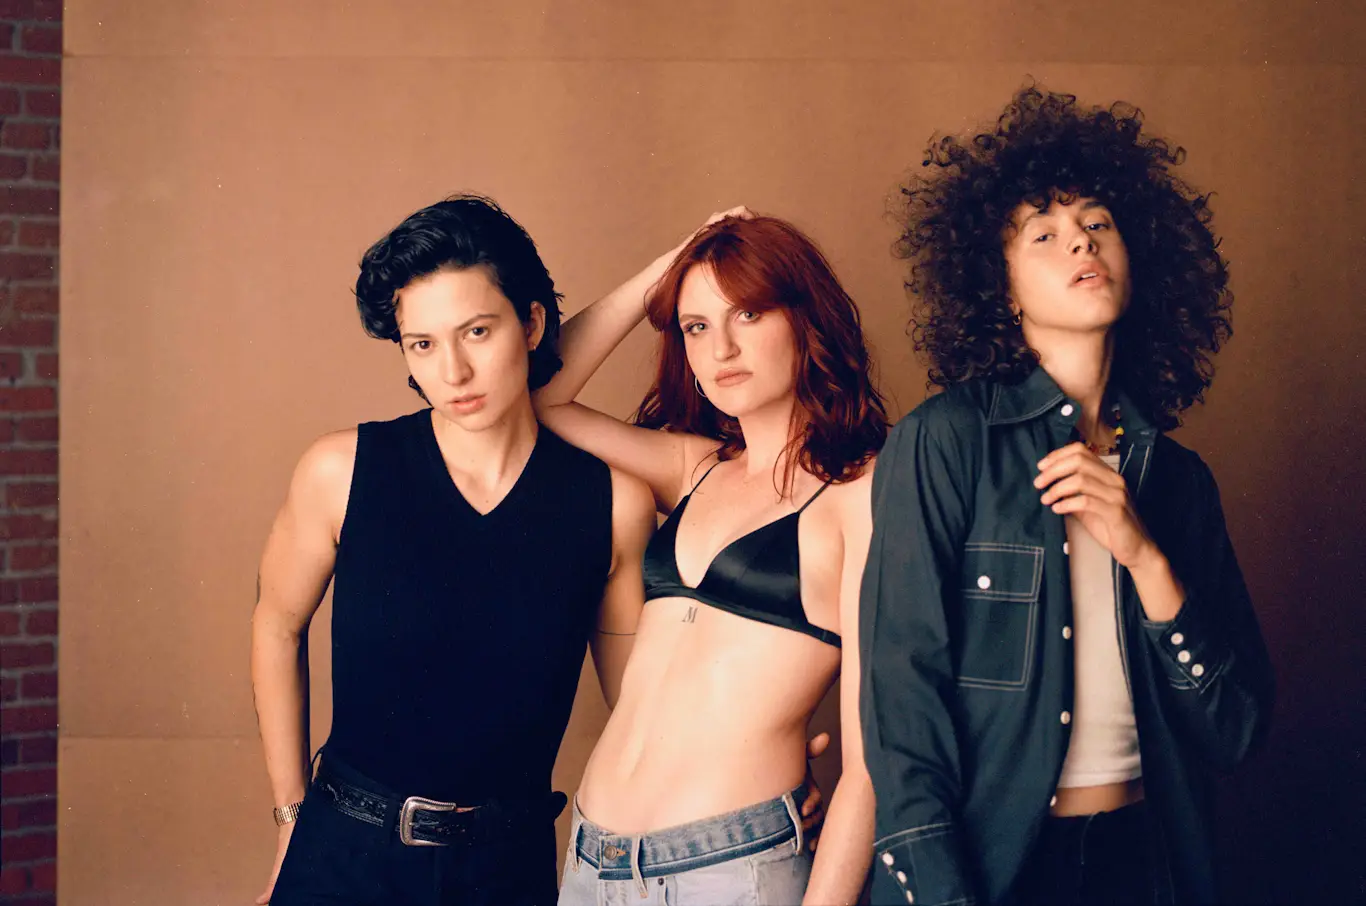 MUNA announce headline Belfast show at Limelight 1 on August 29th 2023